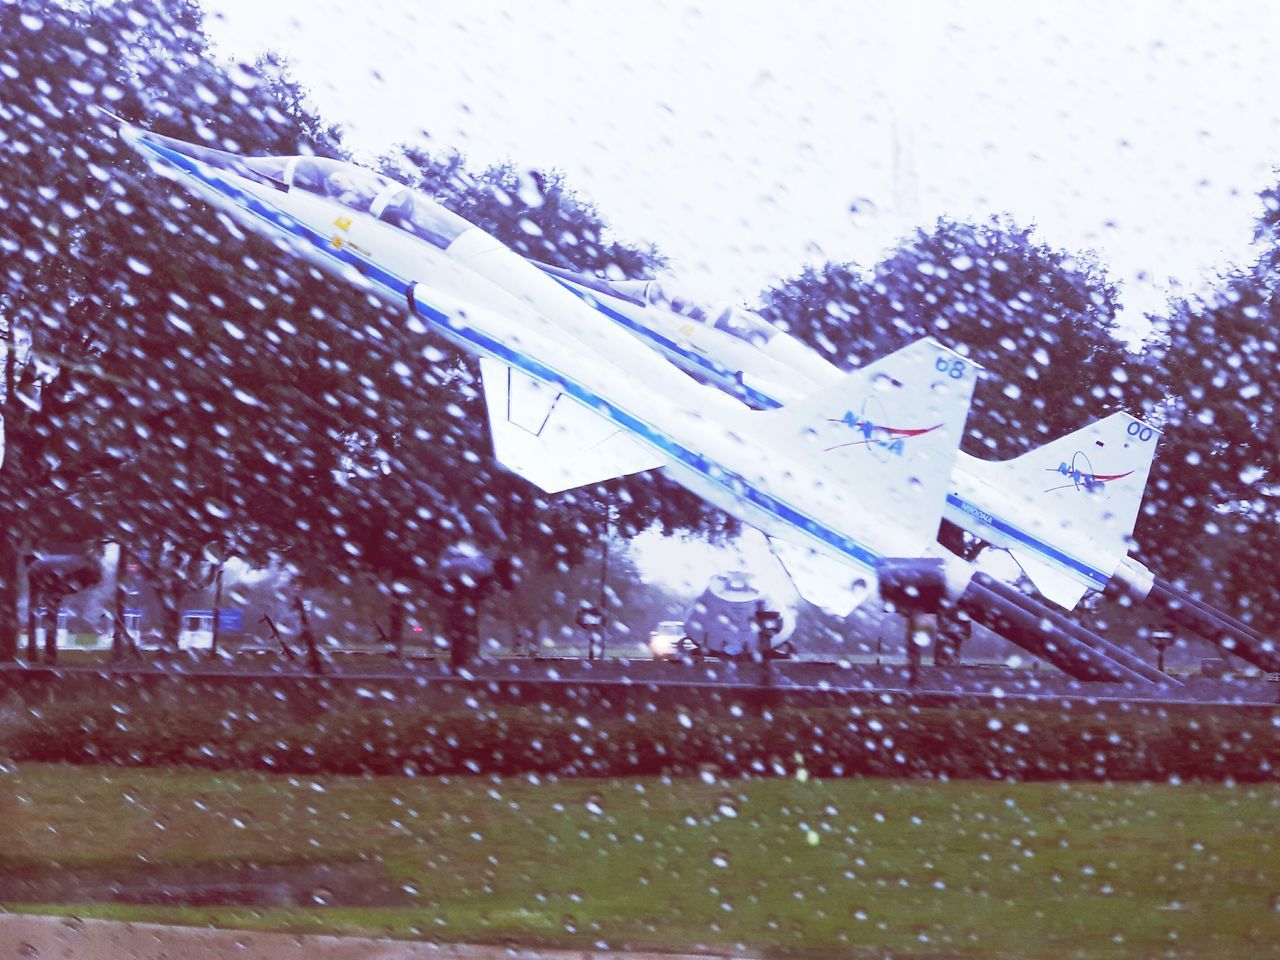 rain, drop, no people, wet, flying, window, airplane, motion, close-up, mid-air, outdoors, day, water, nature, sky, airplane wing